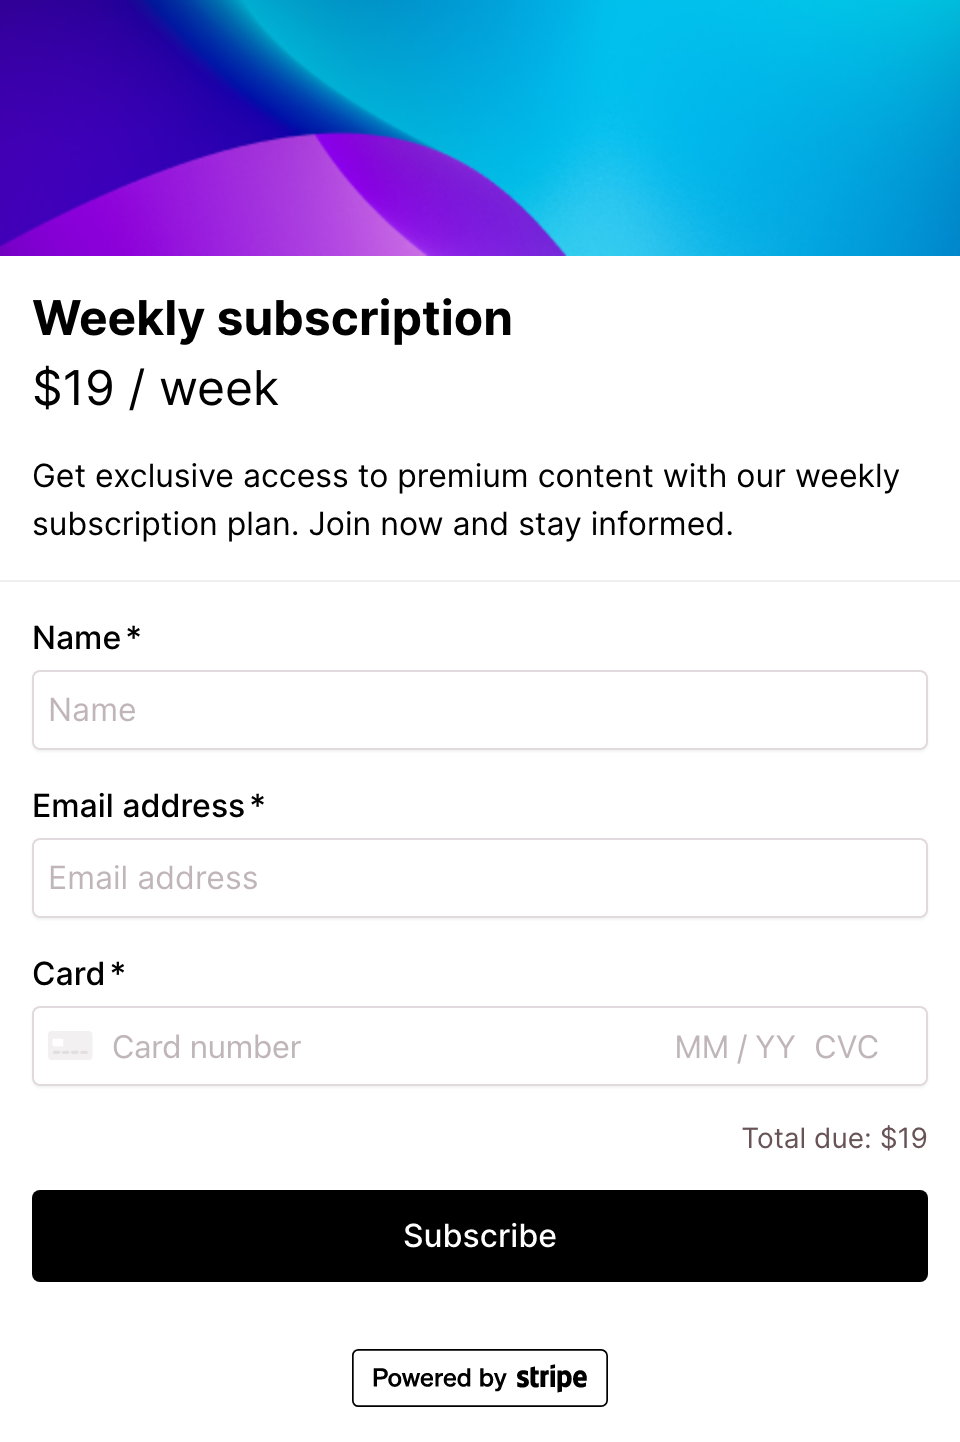 Weekly subscription checkout form